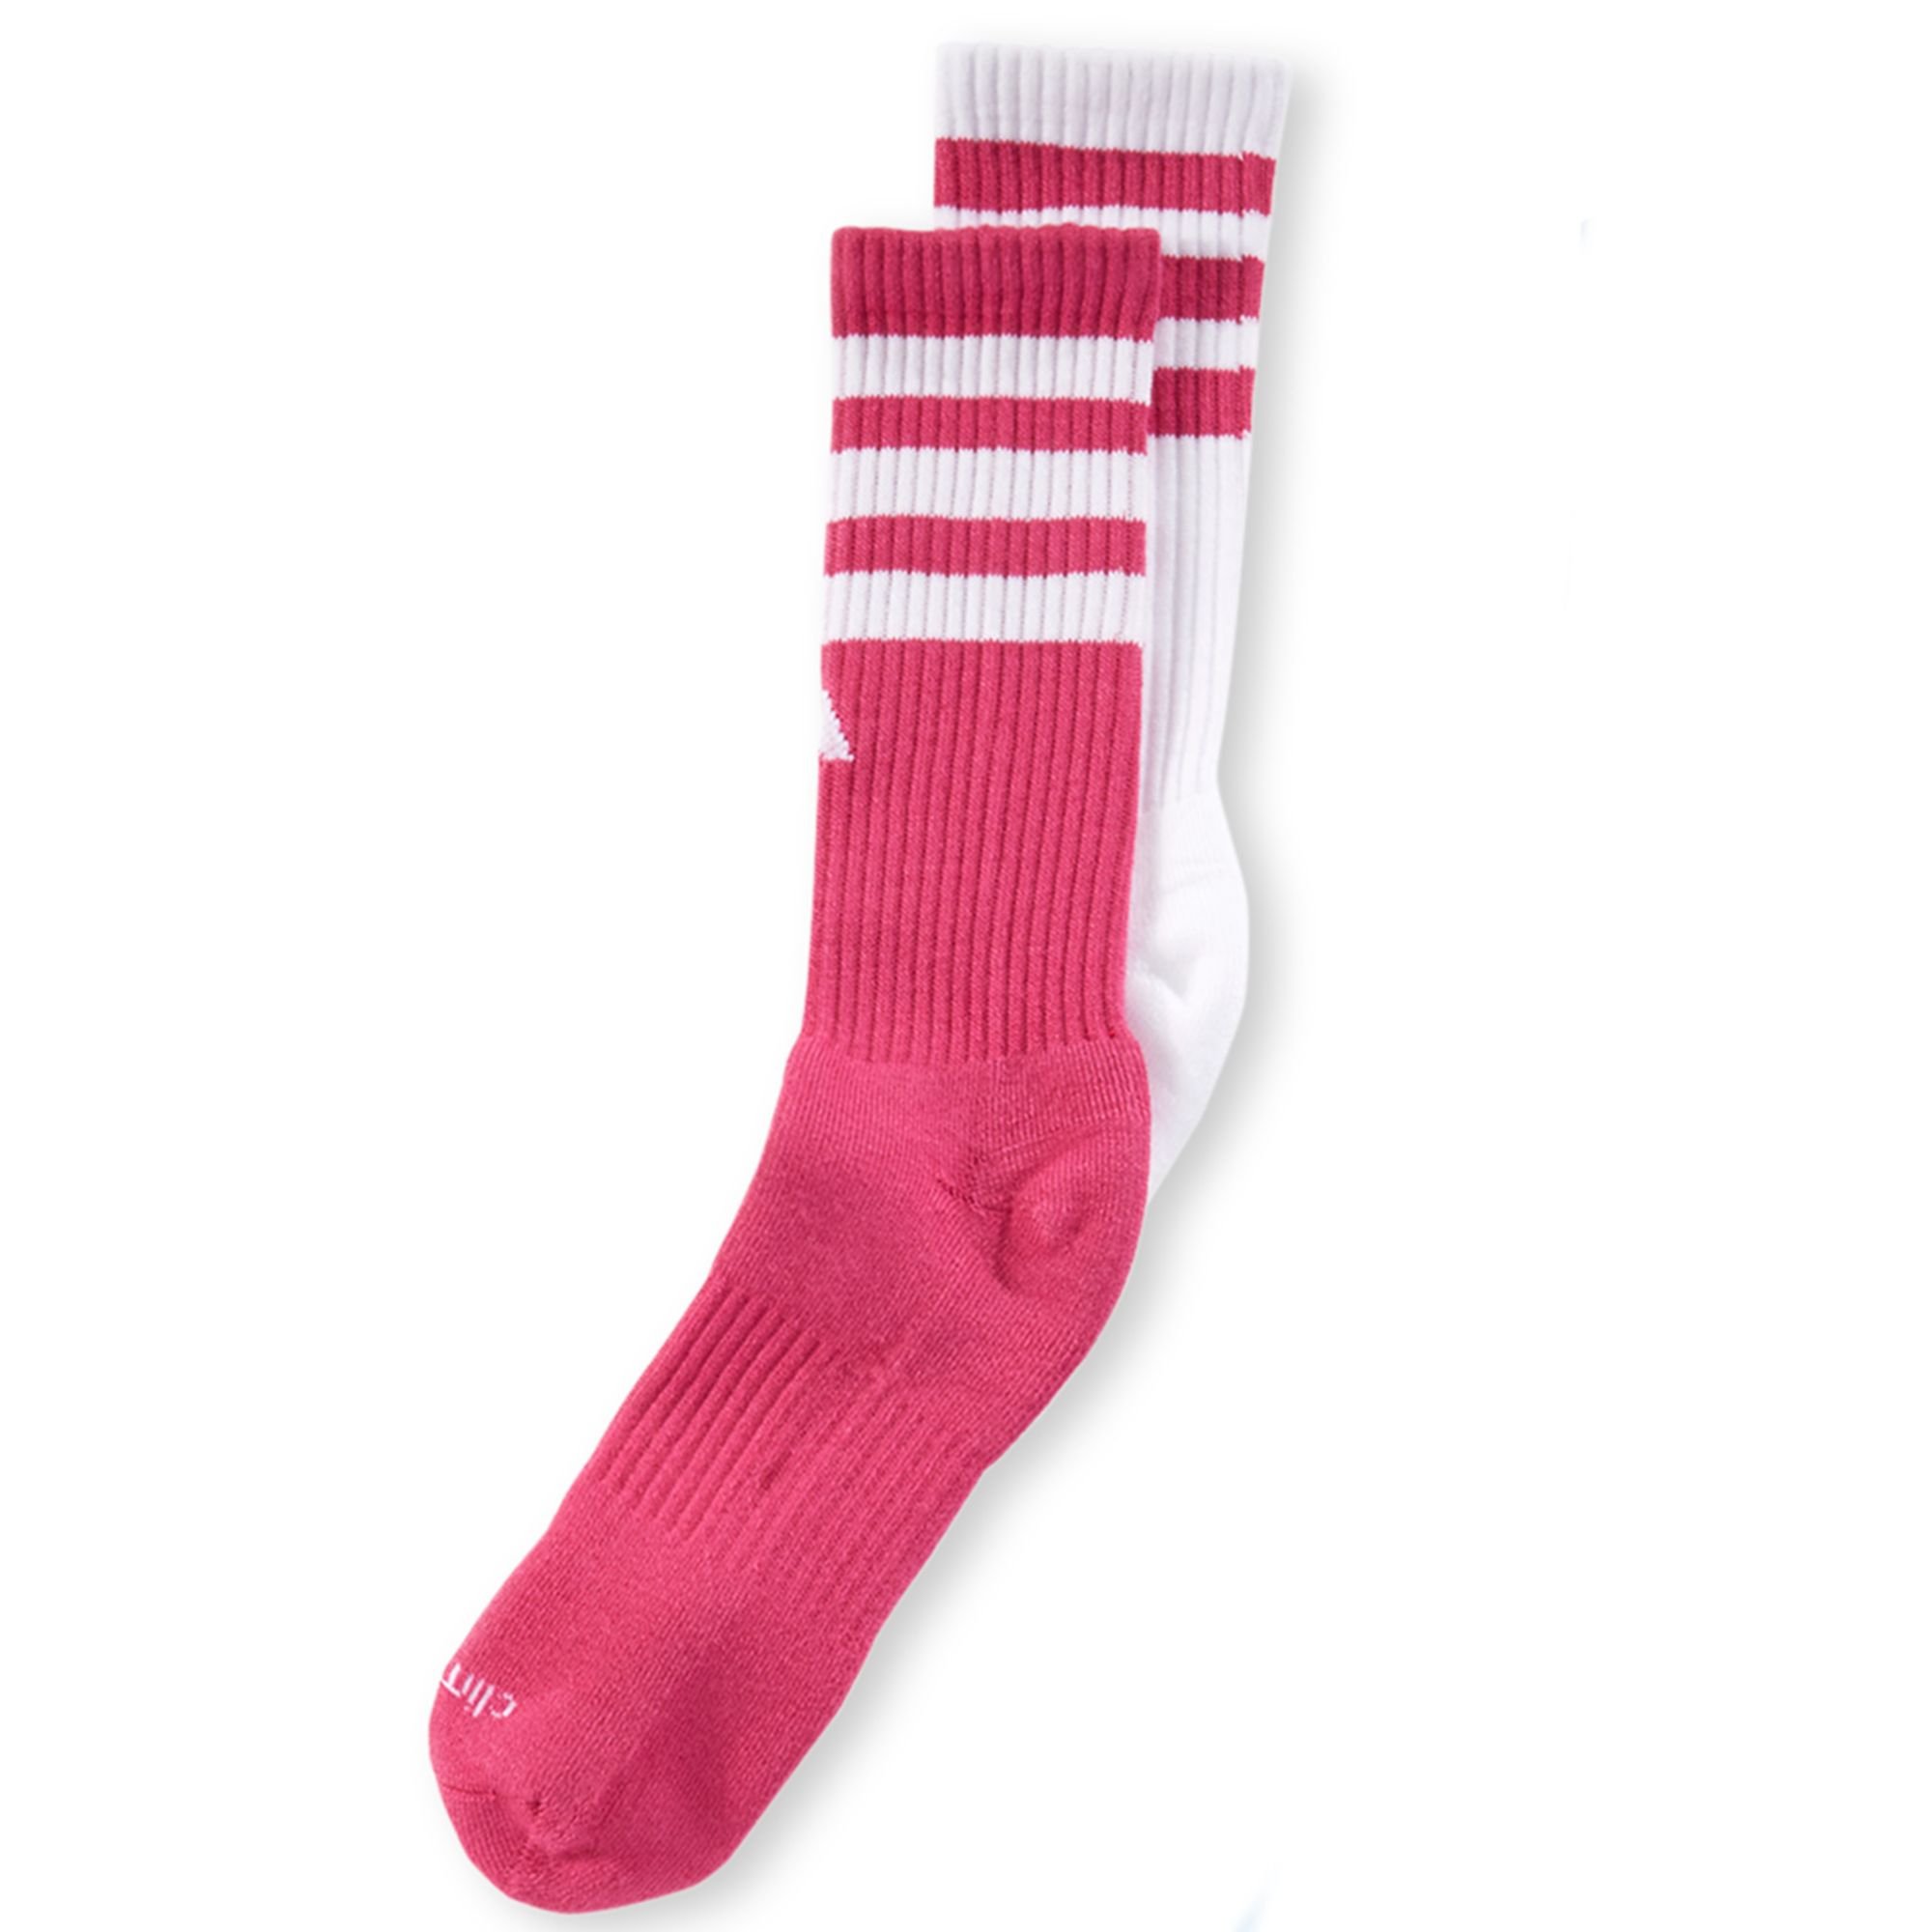 adidas Team Performance Crew Socks 2pack in Pink for Men - Lyst